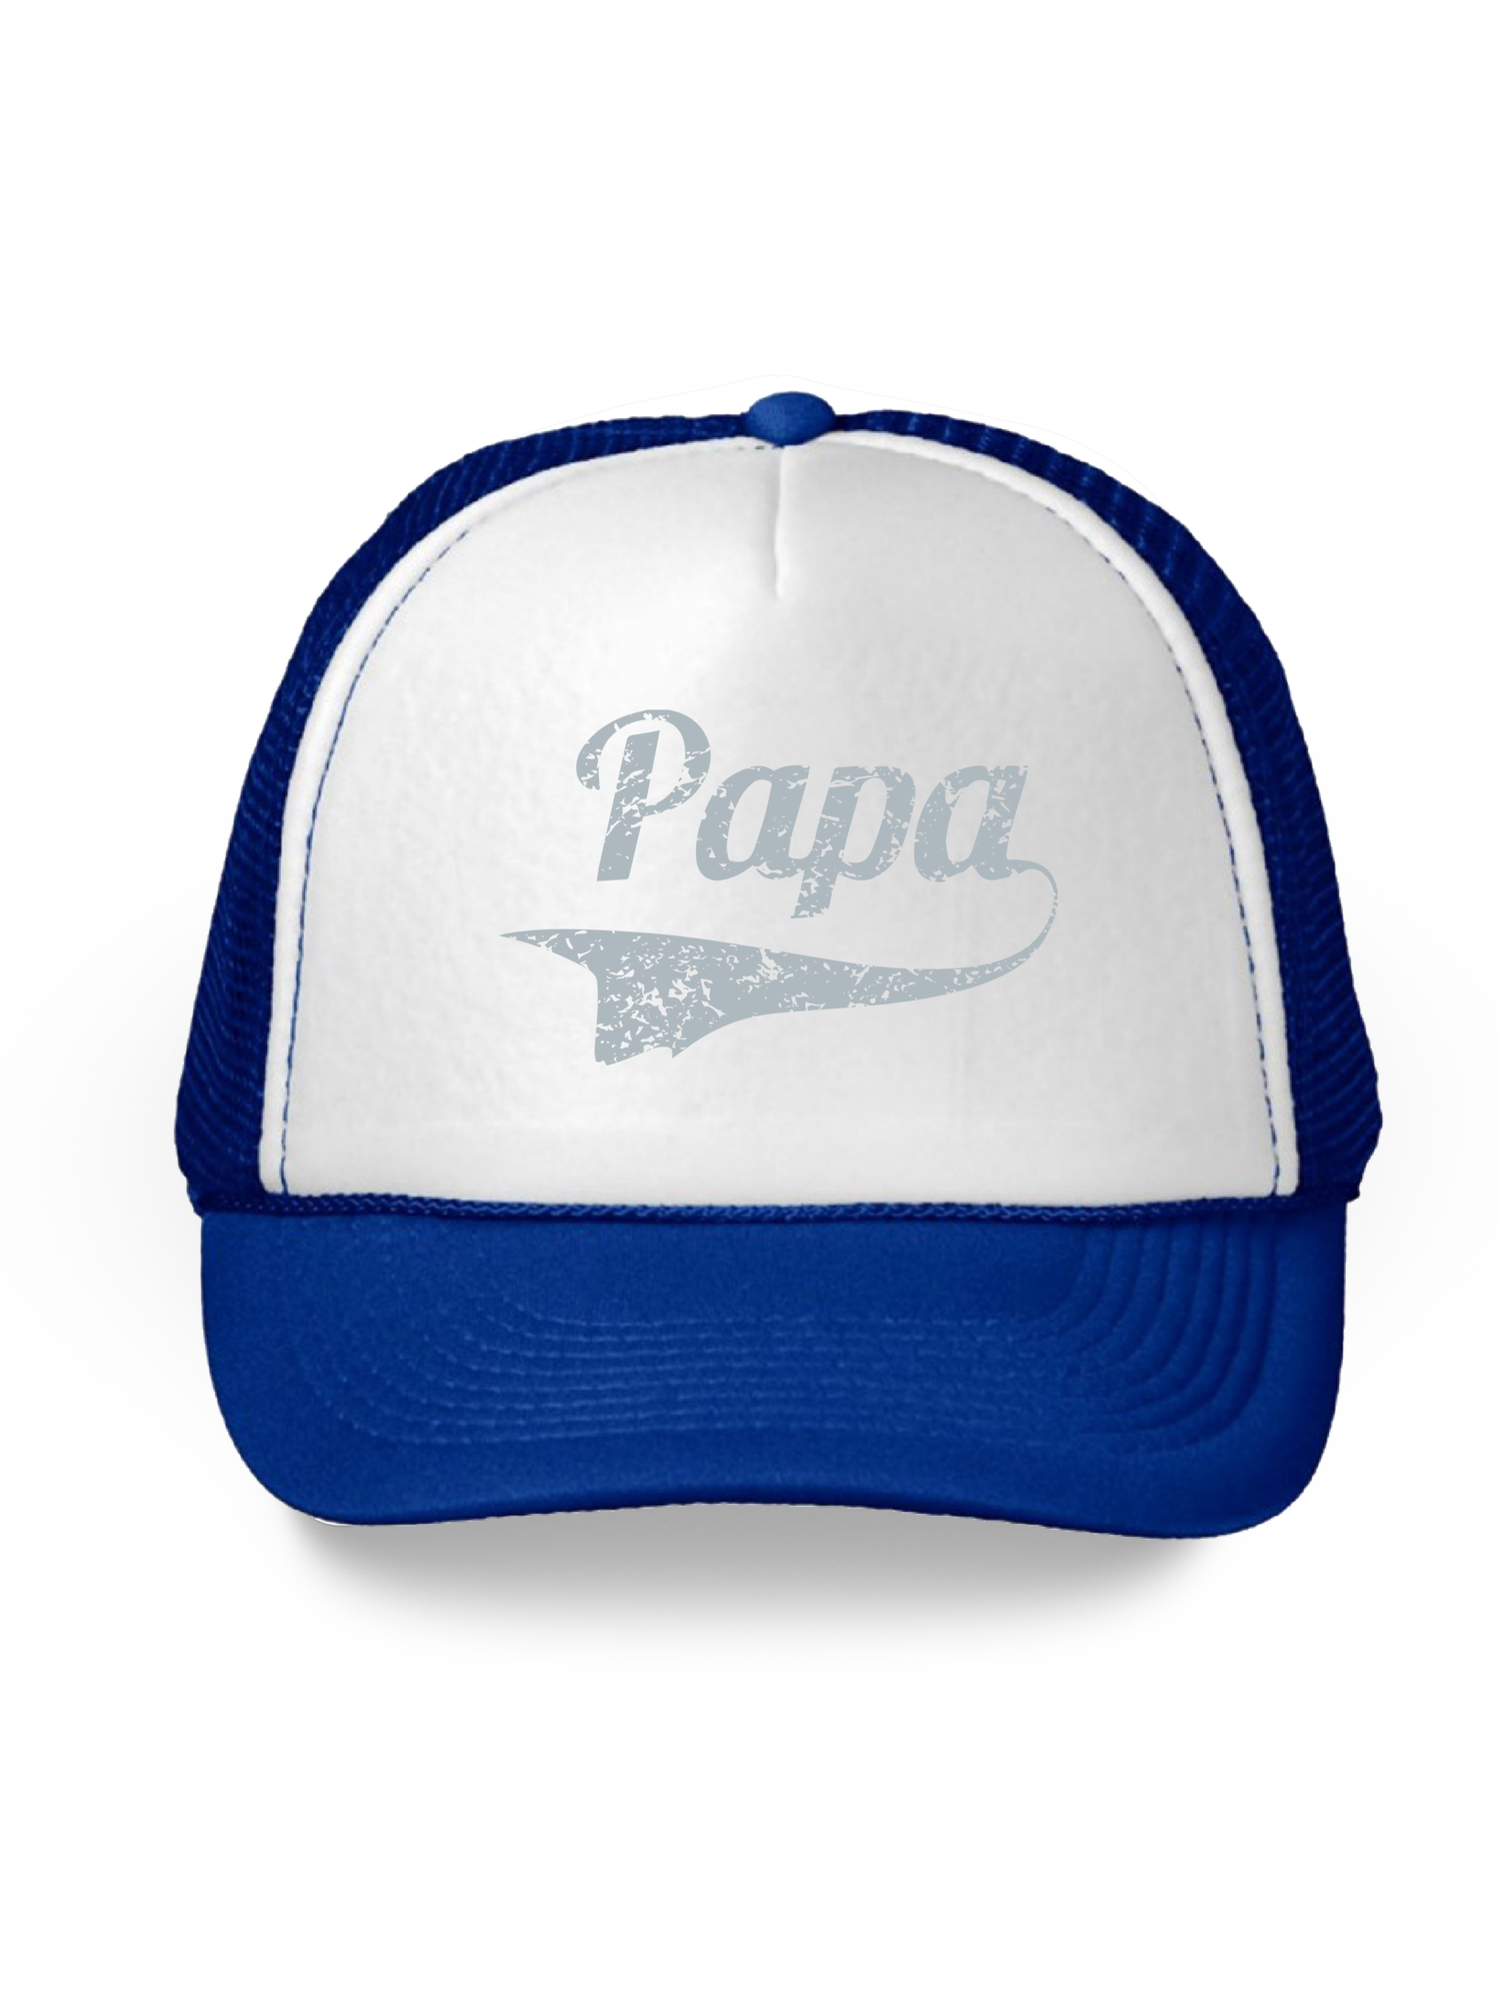 Awkward Styles Papa Trucker Hat Father's Day Gifts for Men Dad Hats Dad 2018 Trucker Hat Funny Gifts for Dad Hat Accessories for Men Father Trucker Hat Daddy 2018 Snapback Hat Dad Hats with Sayings - image 1 of 6